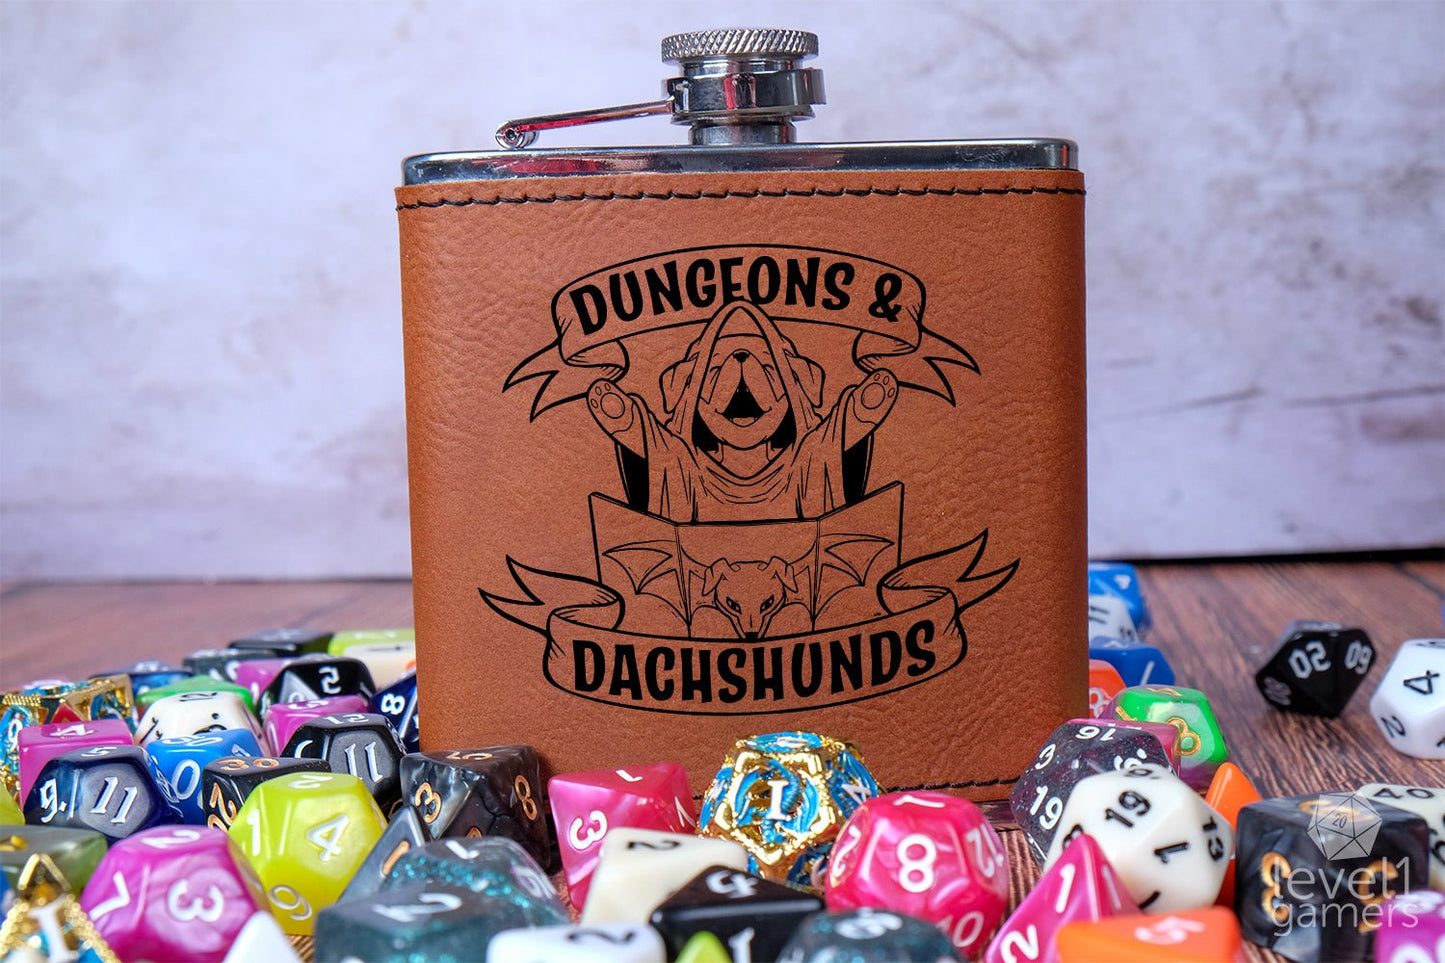 Dungeons & Dachshunds Flask  Level 1 Gamers   